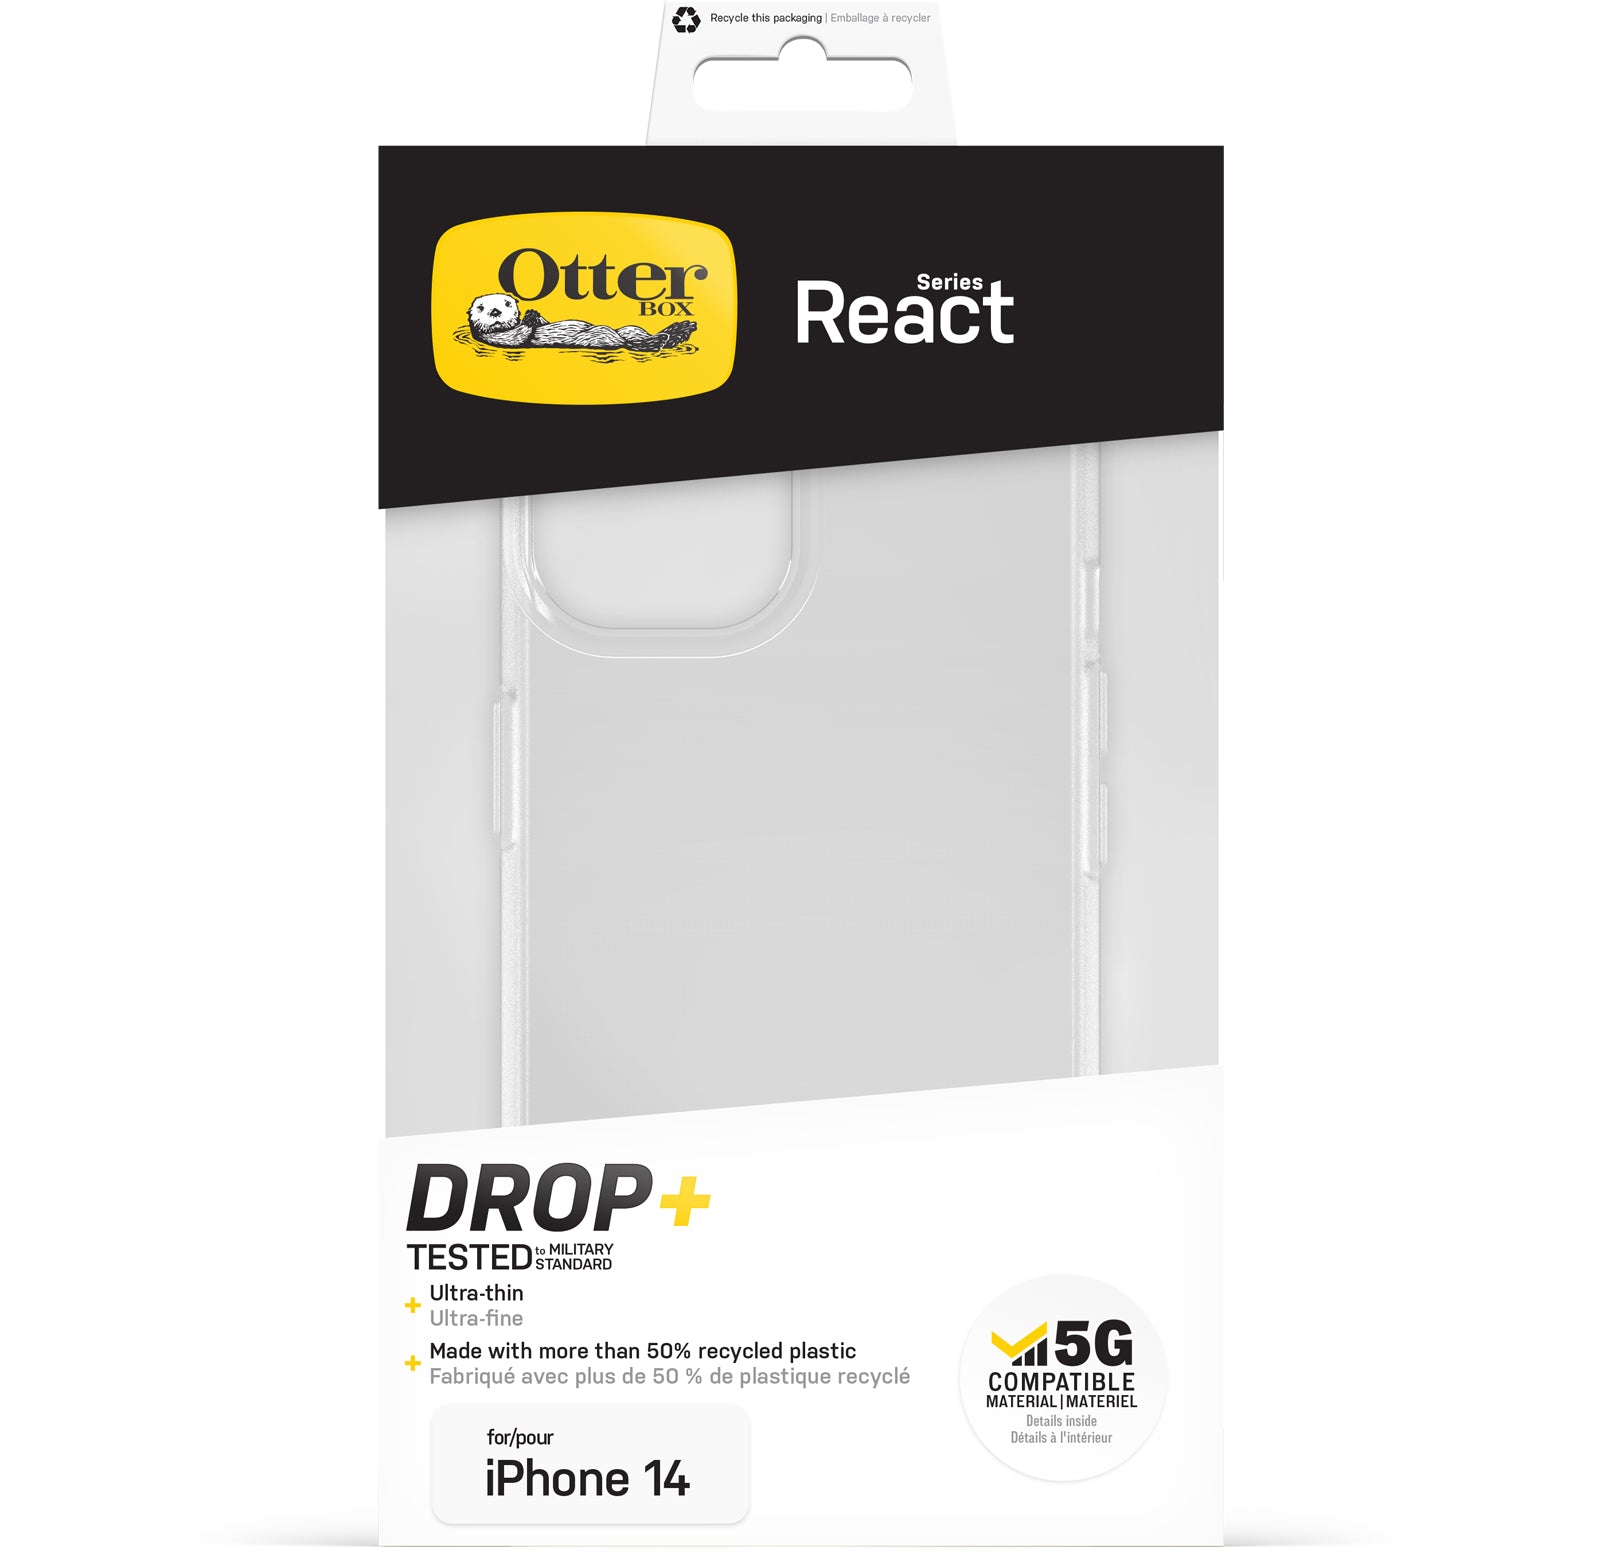 OtterBox React Case for iPhone 14